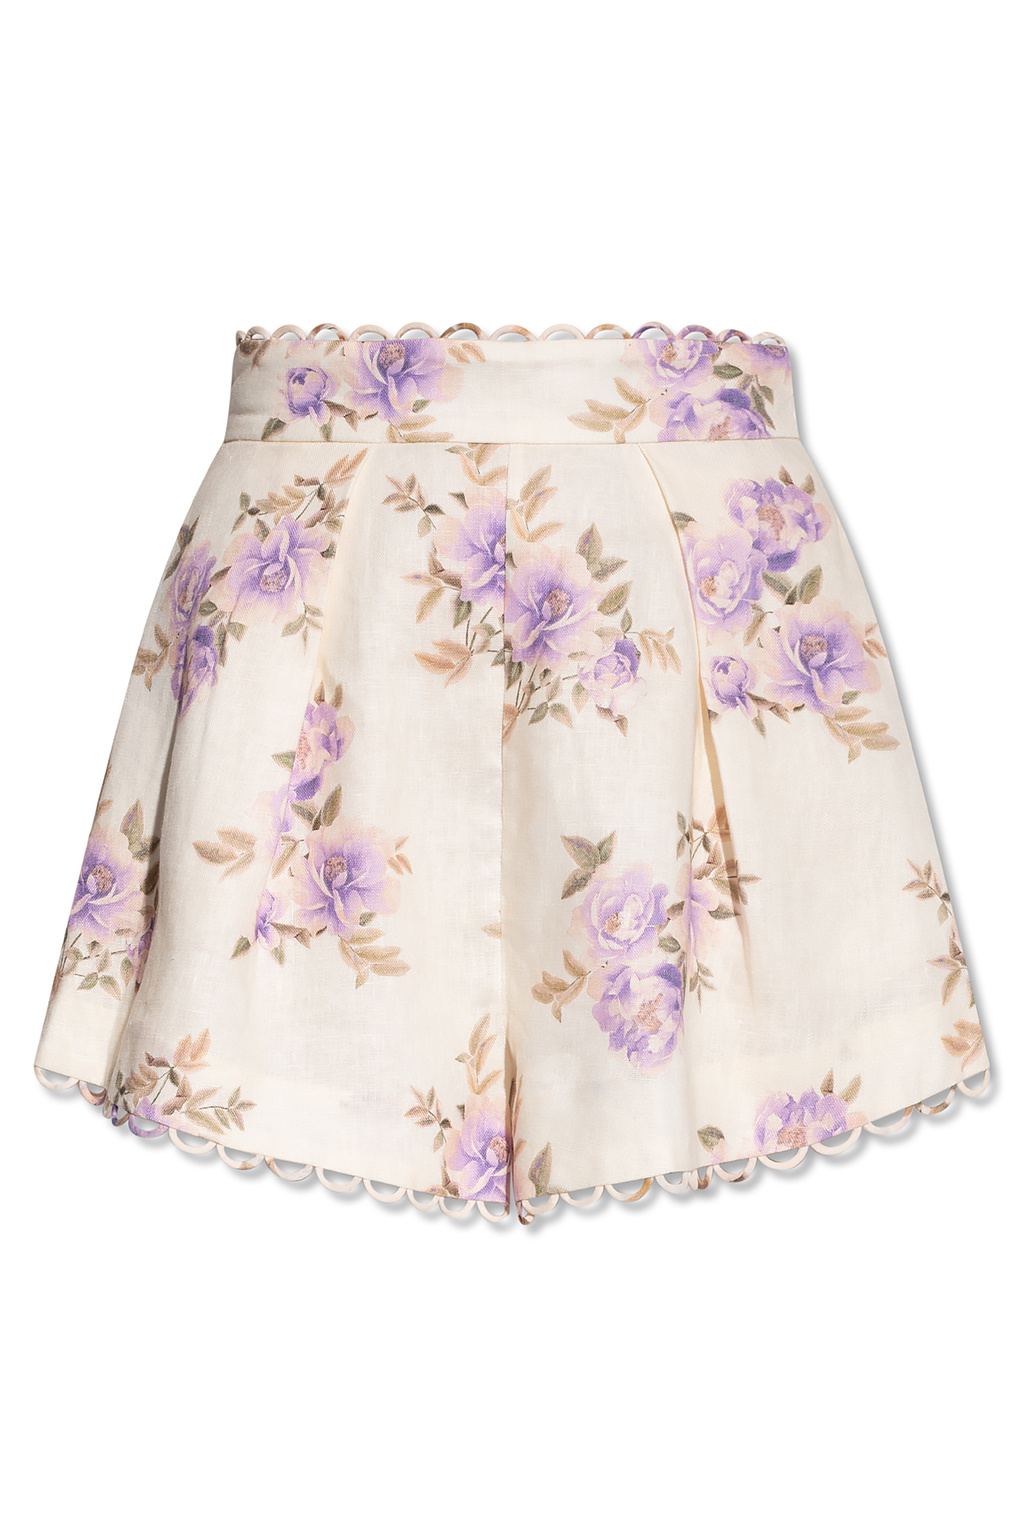 Zimmermann shorts pms90073 with floral motif